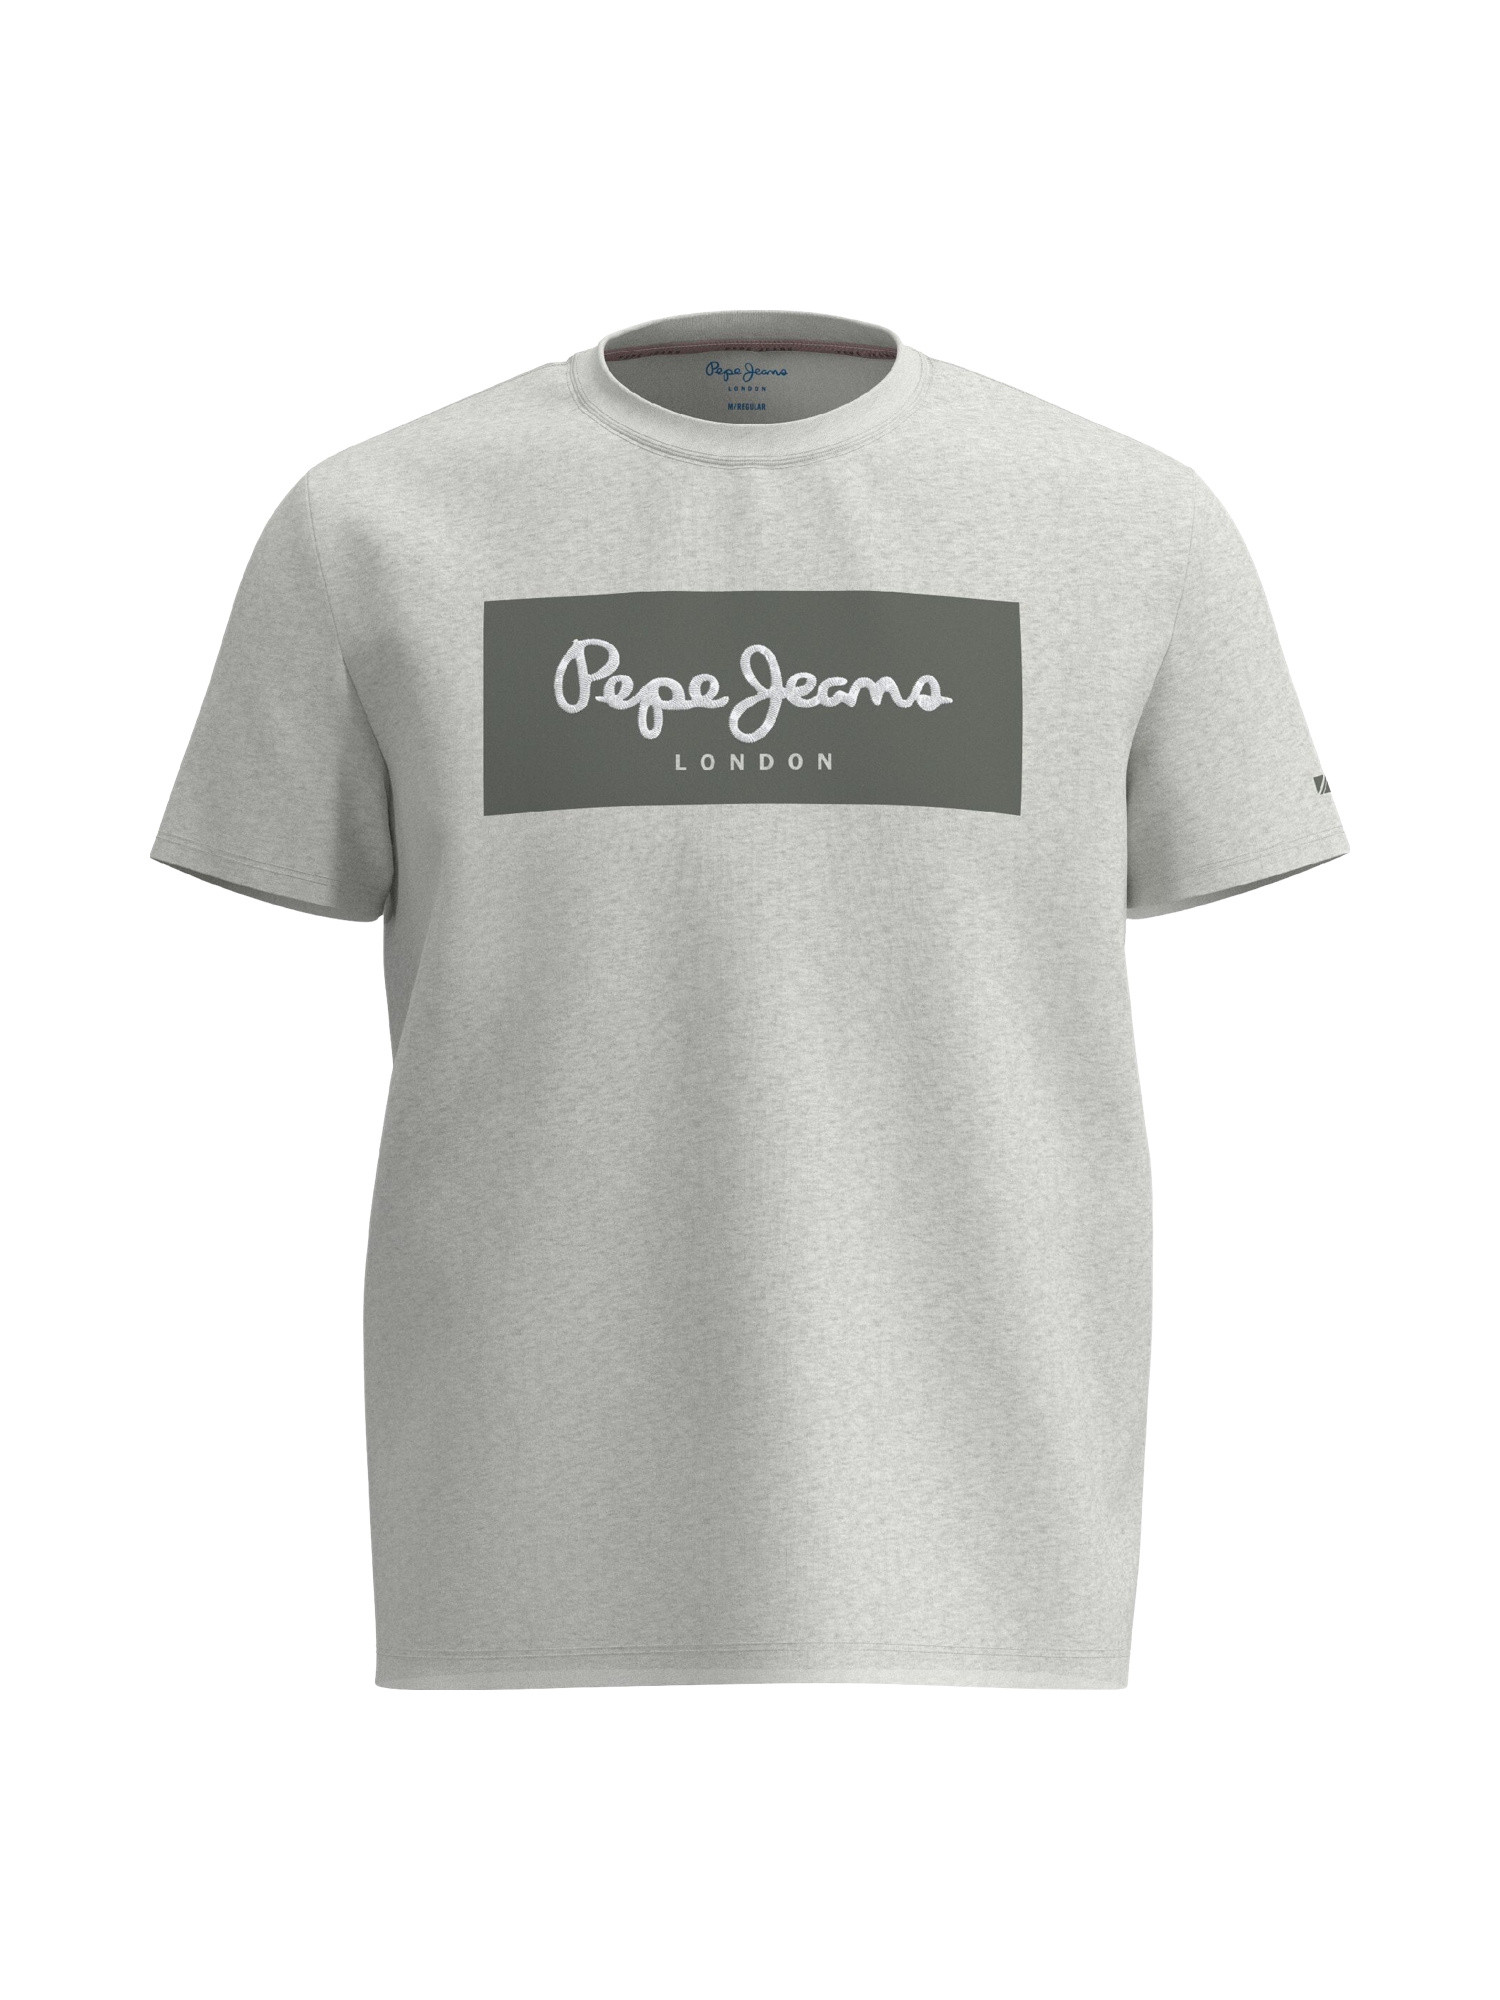 Pepe Jeans - T-shirt con logo in cotone, Bianco, large image number 0